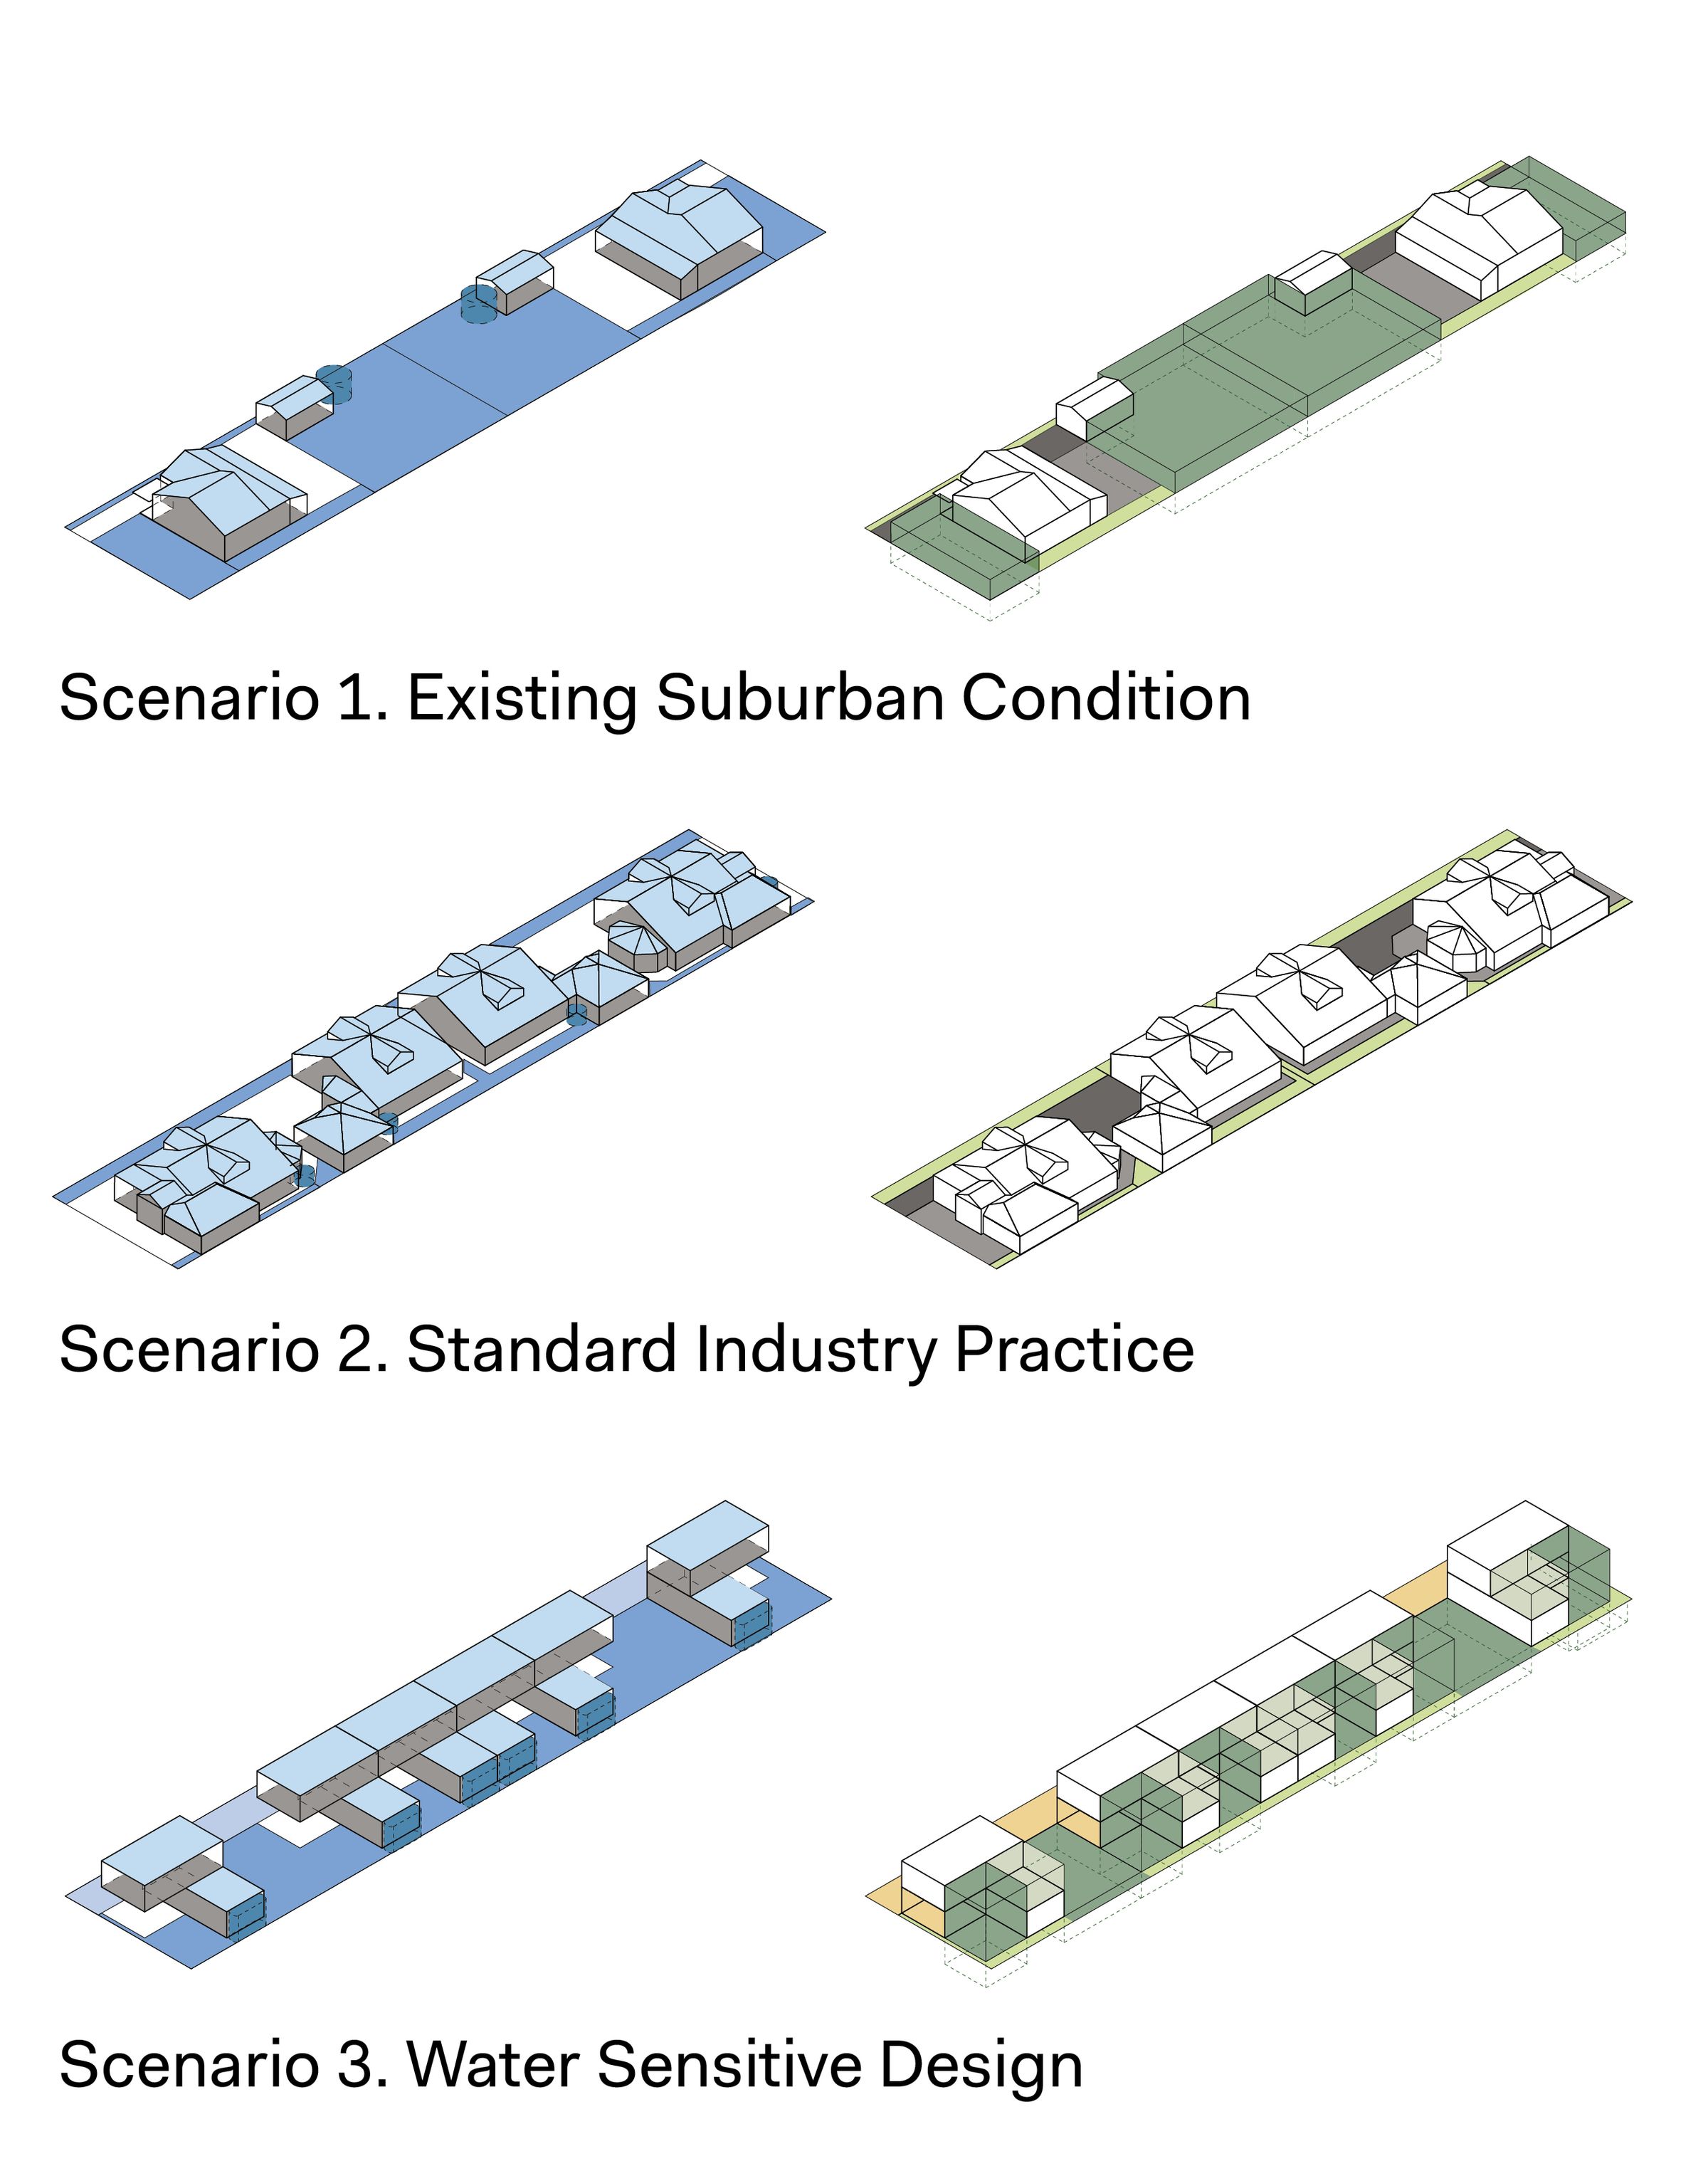 Six architectural models for blue and green housing typologies in groups of three for each scenario